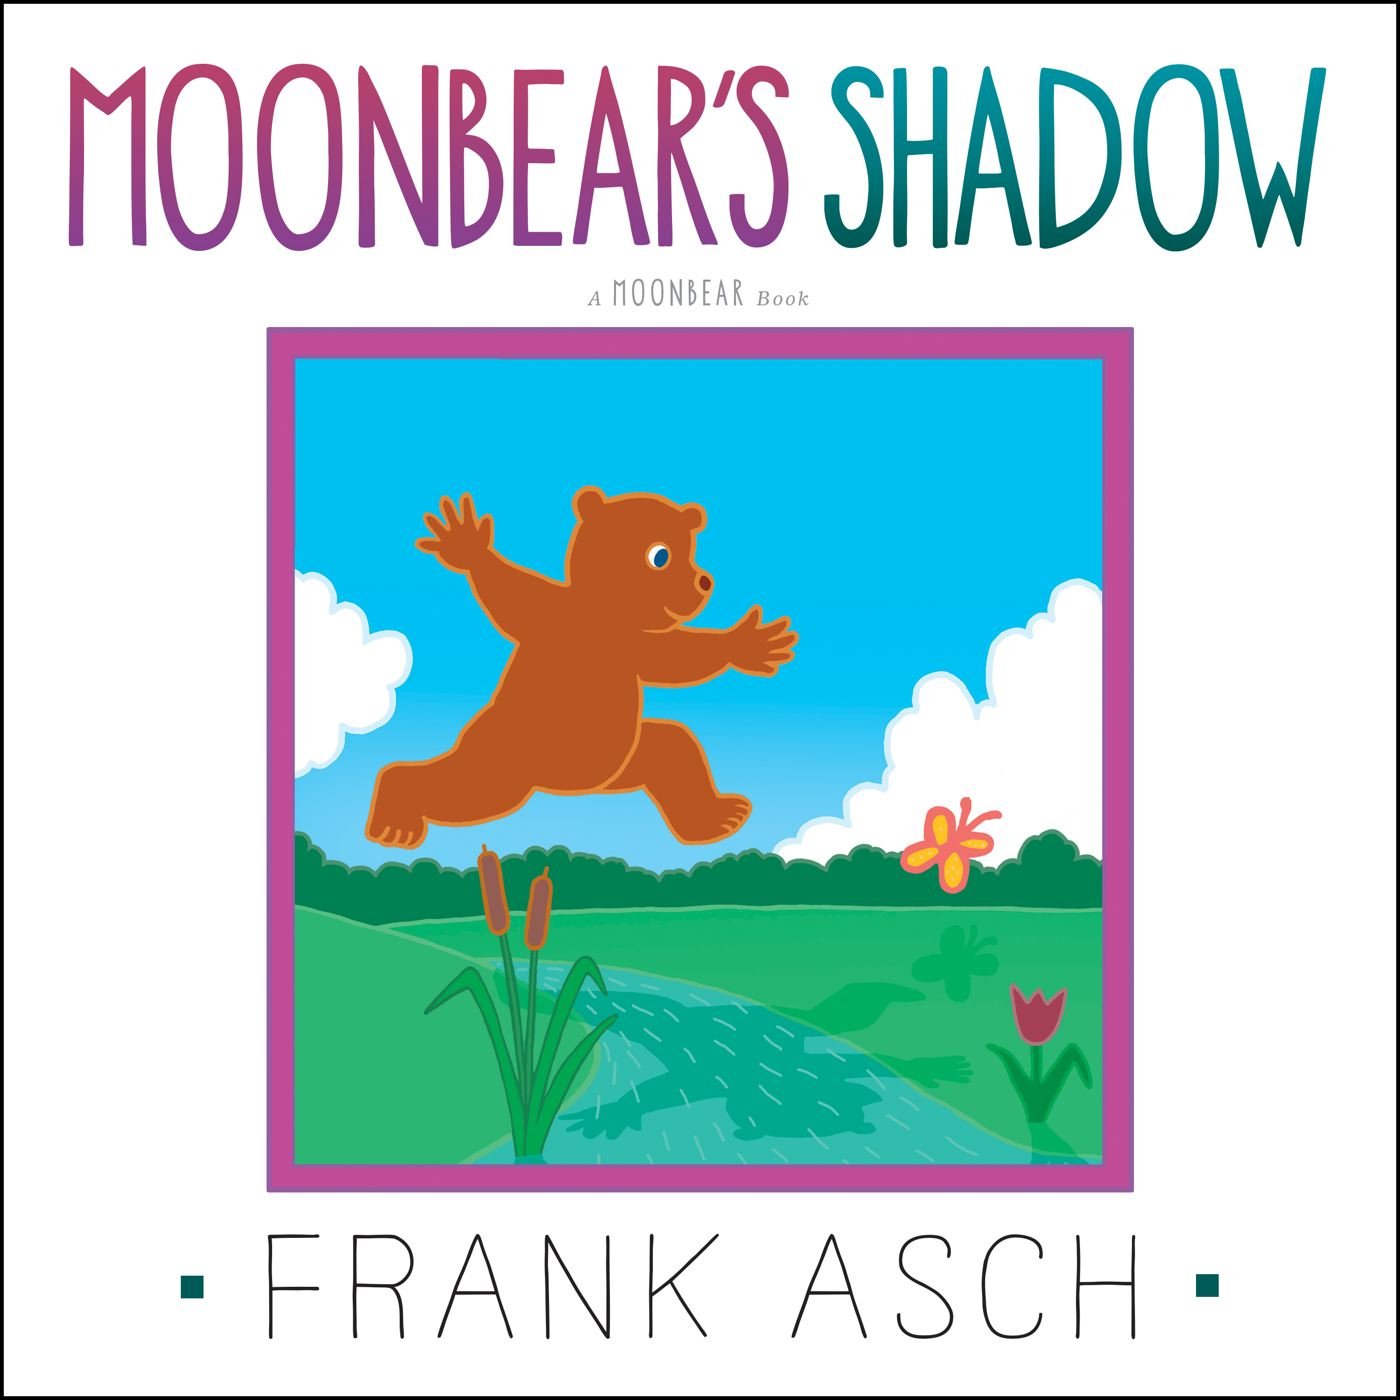 STEAM activities inspired by the children's book Moonbear's Shadow